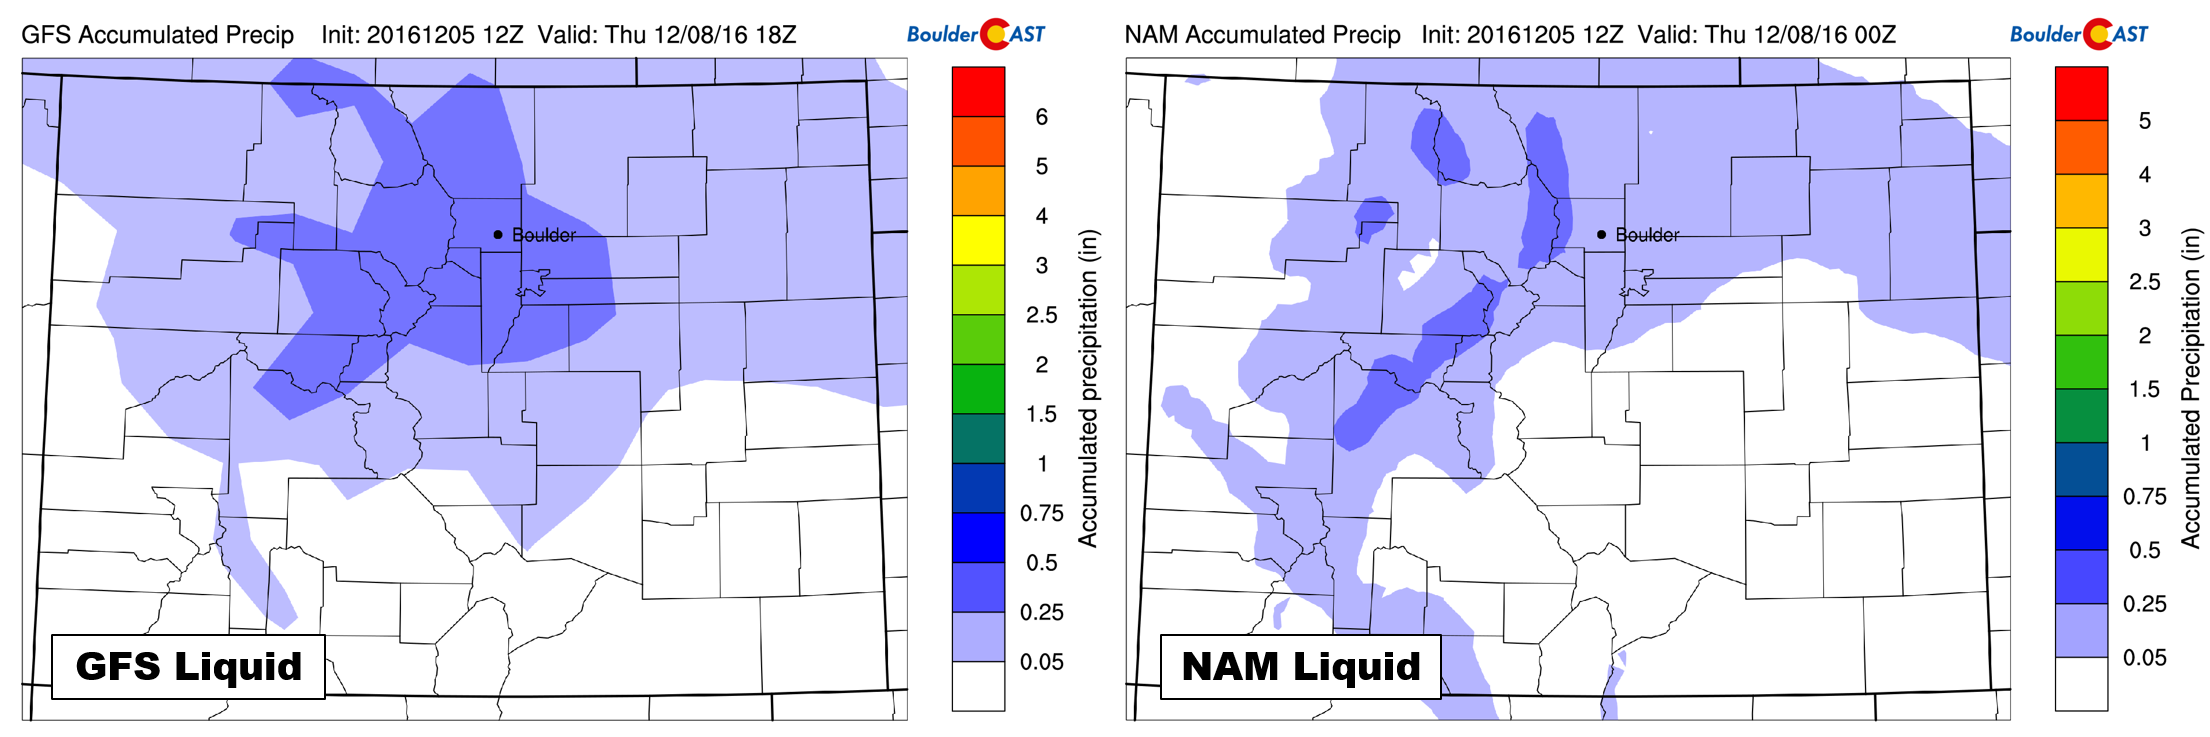 Total accumulated liquid precipitation forecast maps from the GFS (left) and NAM (right) models